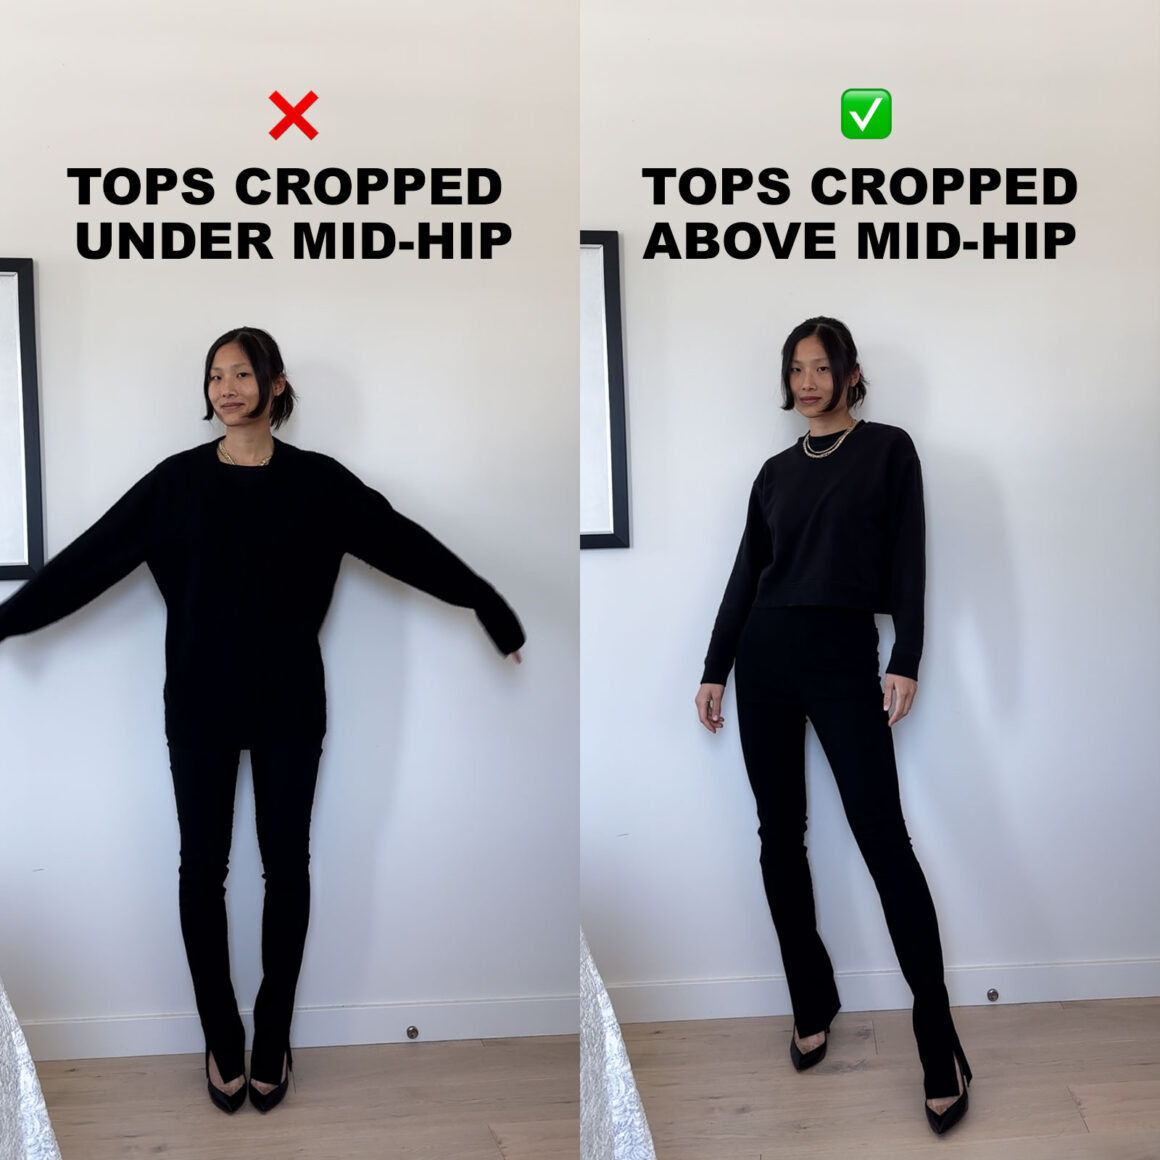 top cropped below mid hip vs top cropped above mid hip